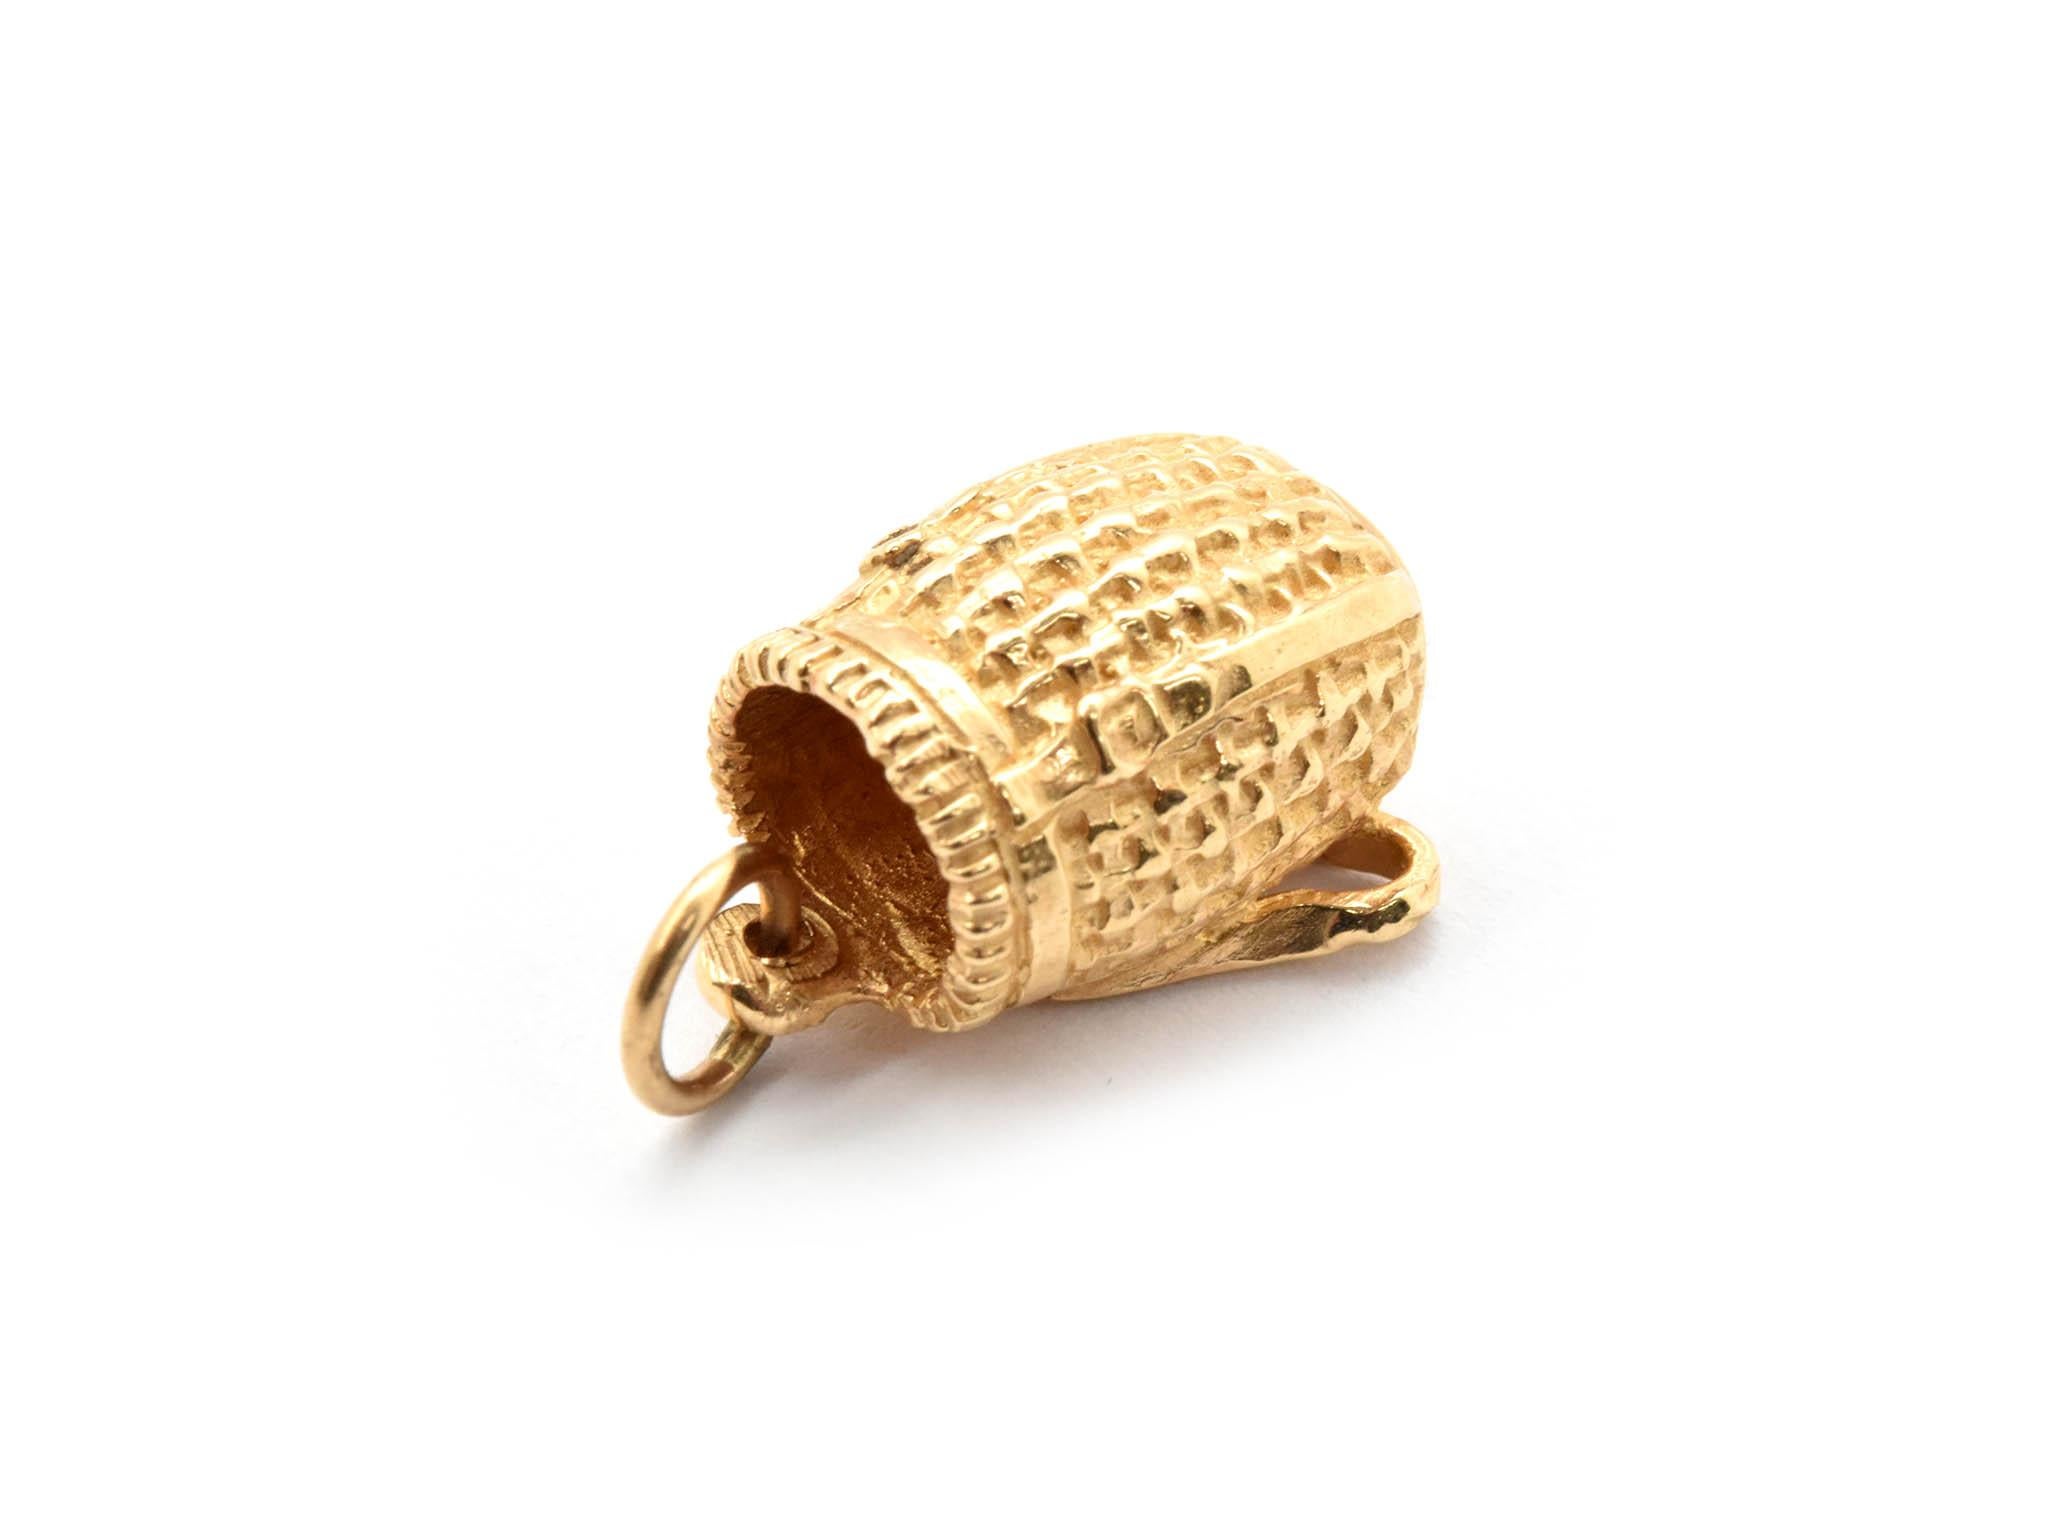 This charm is made in 14k yellow gold in the shape of a basket on a stand. The charm measures 12x17mm, and it weighs 4.7 grams.